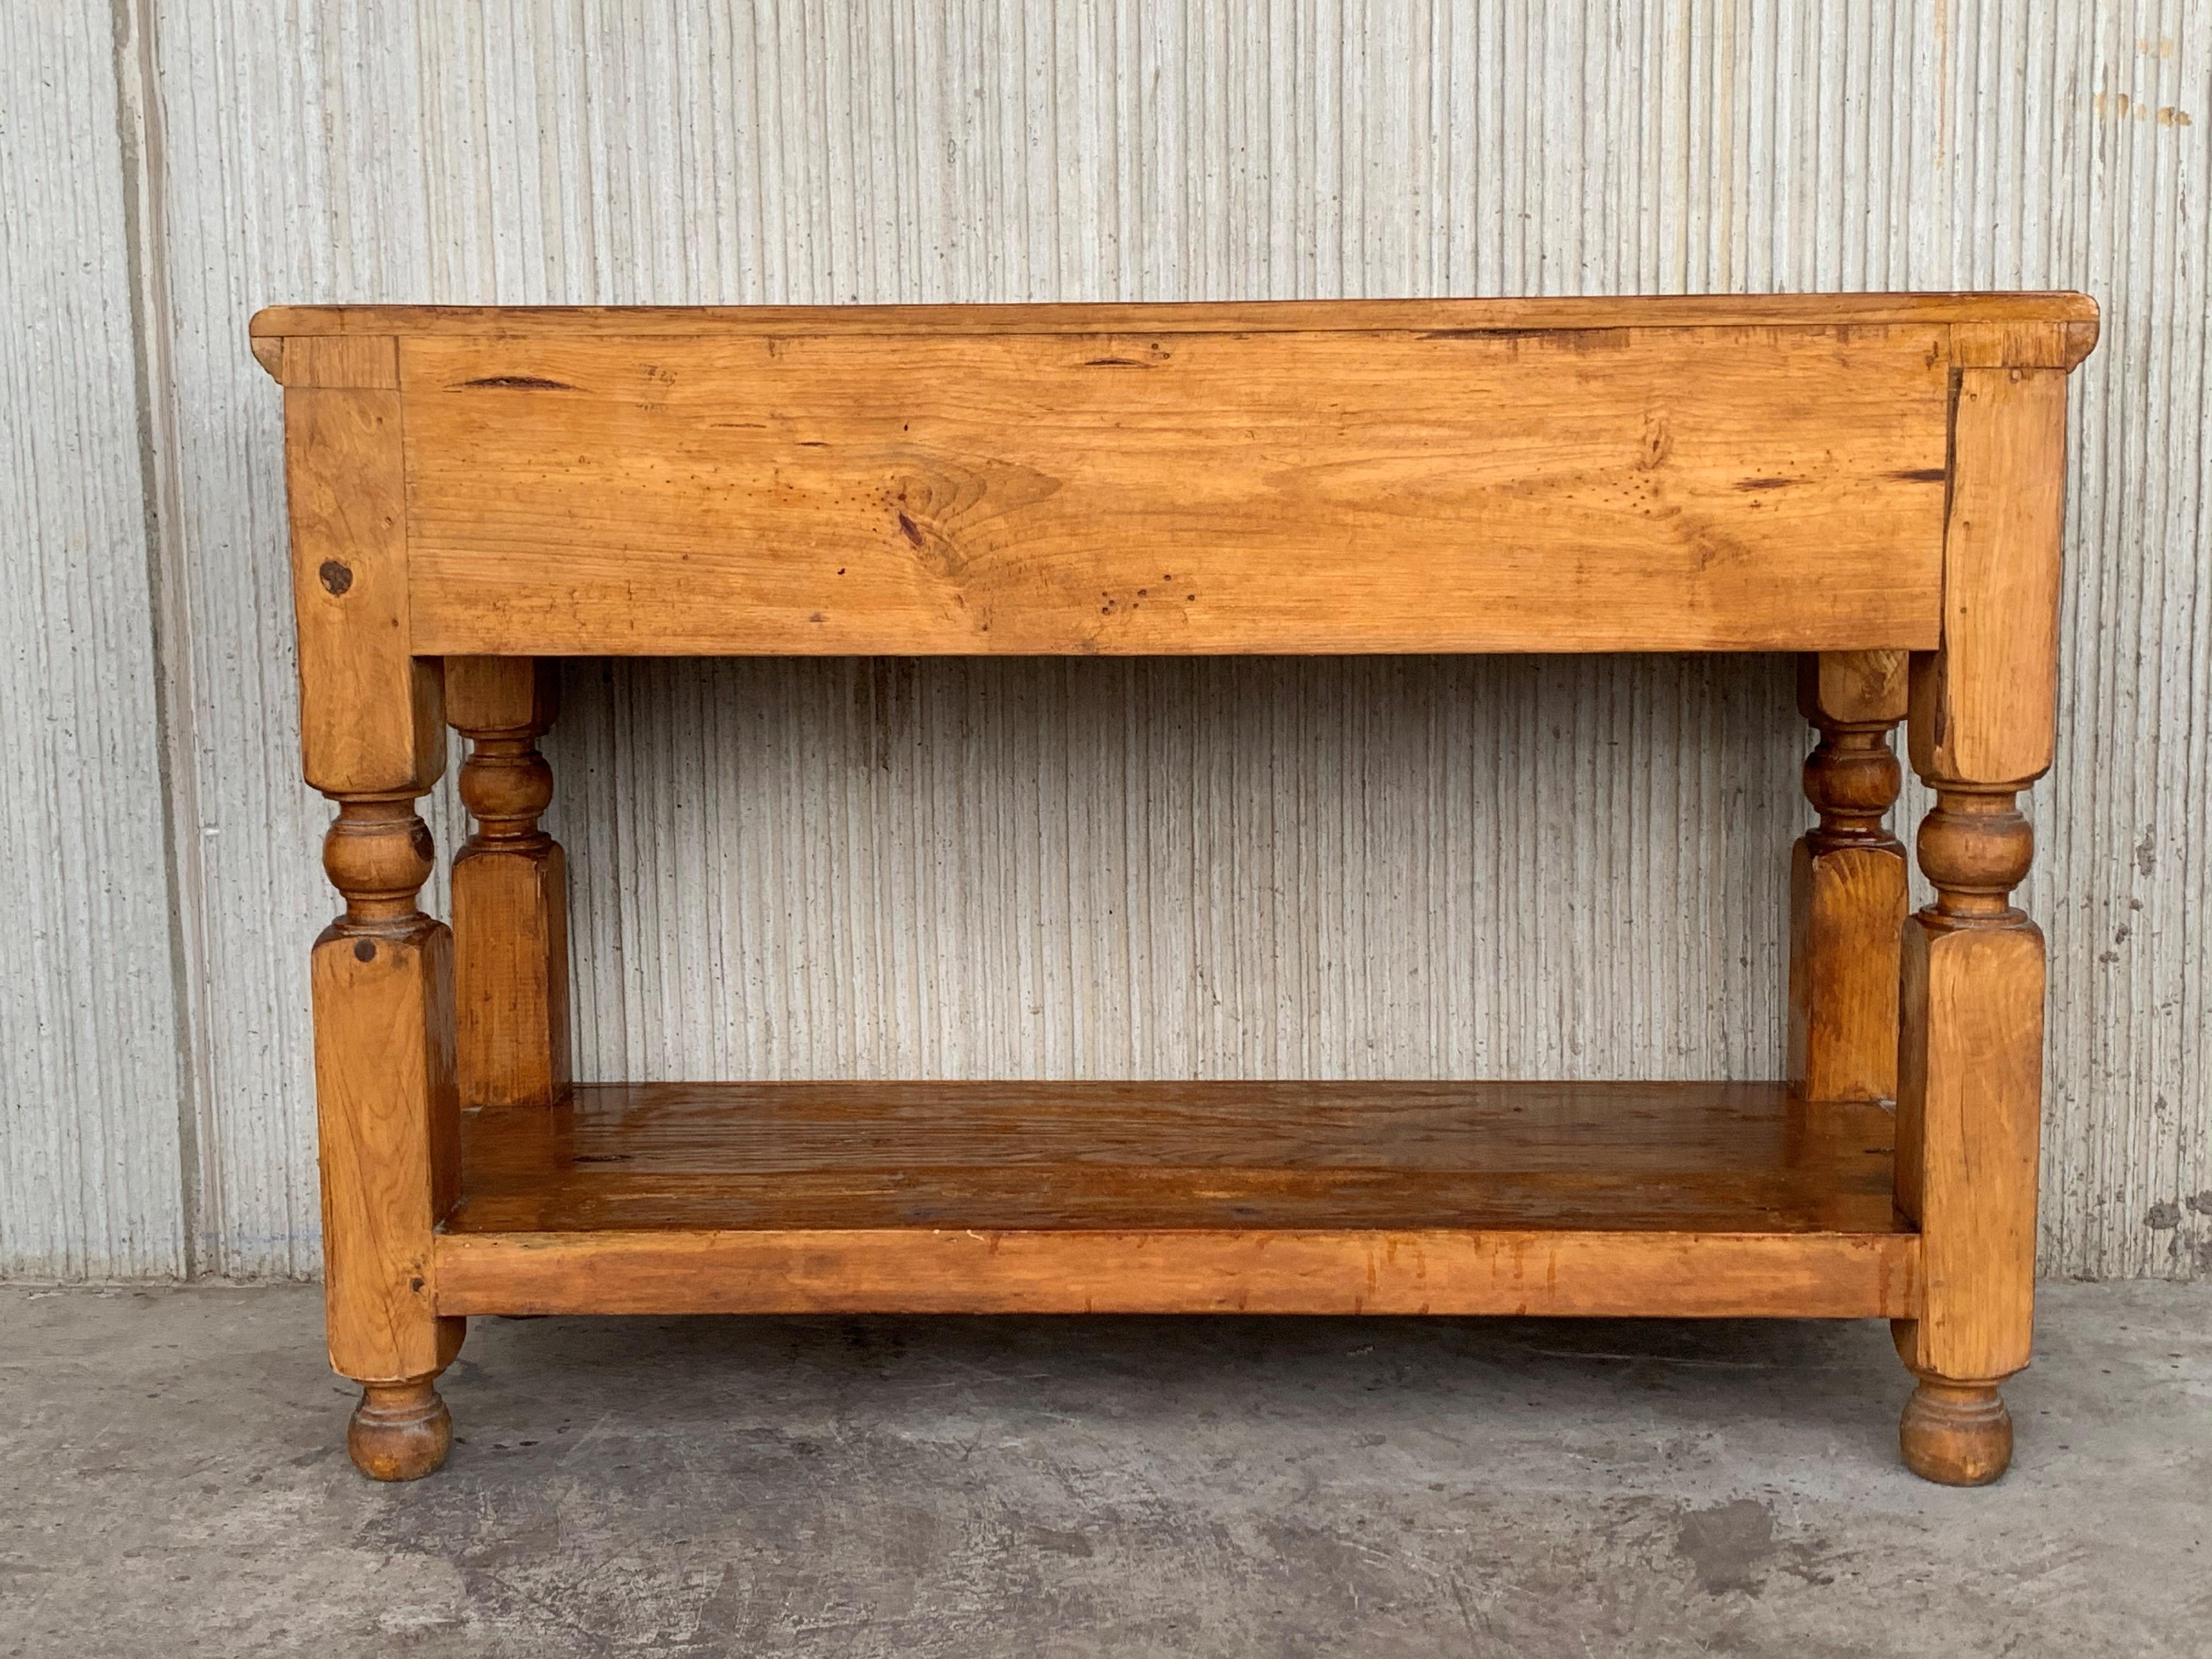 French Provincial French Two-Drawer Console Table in Antique Pine with Low Shelve